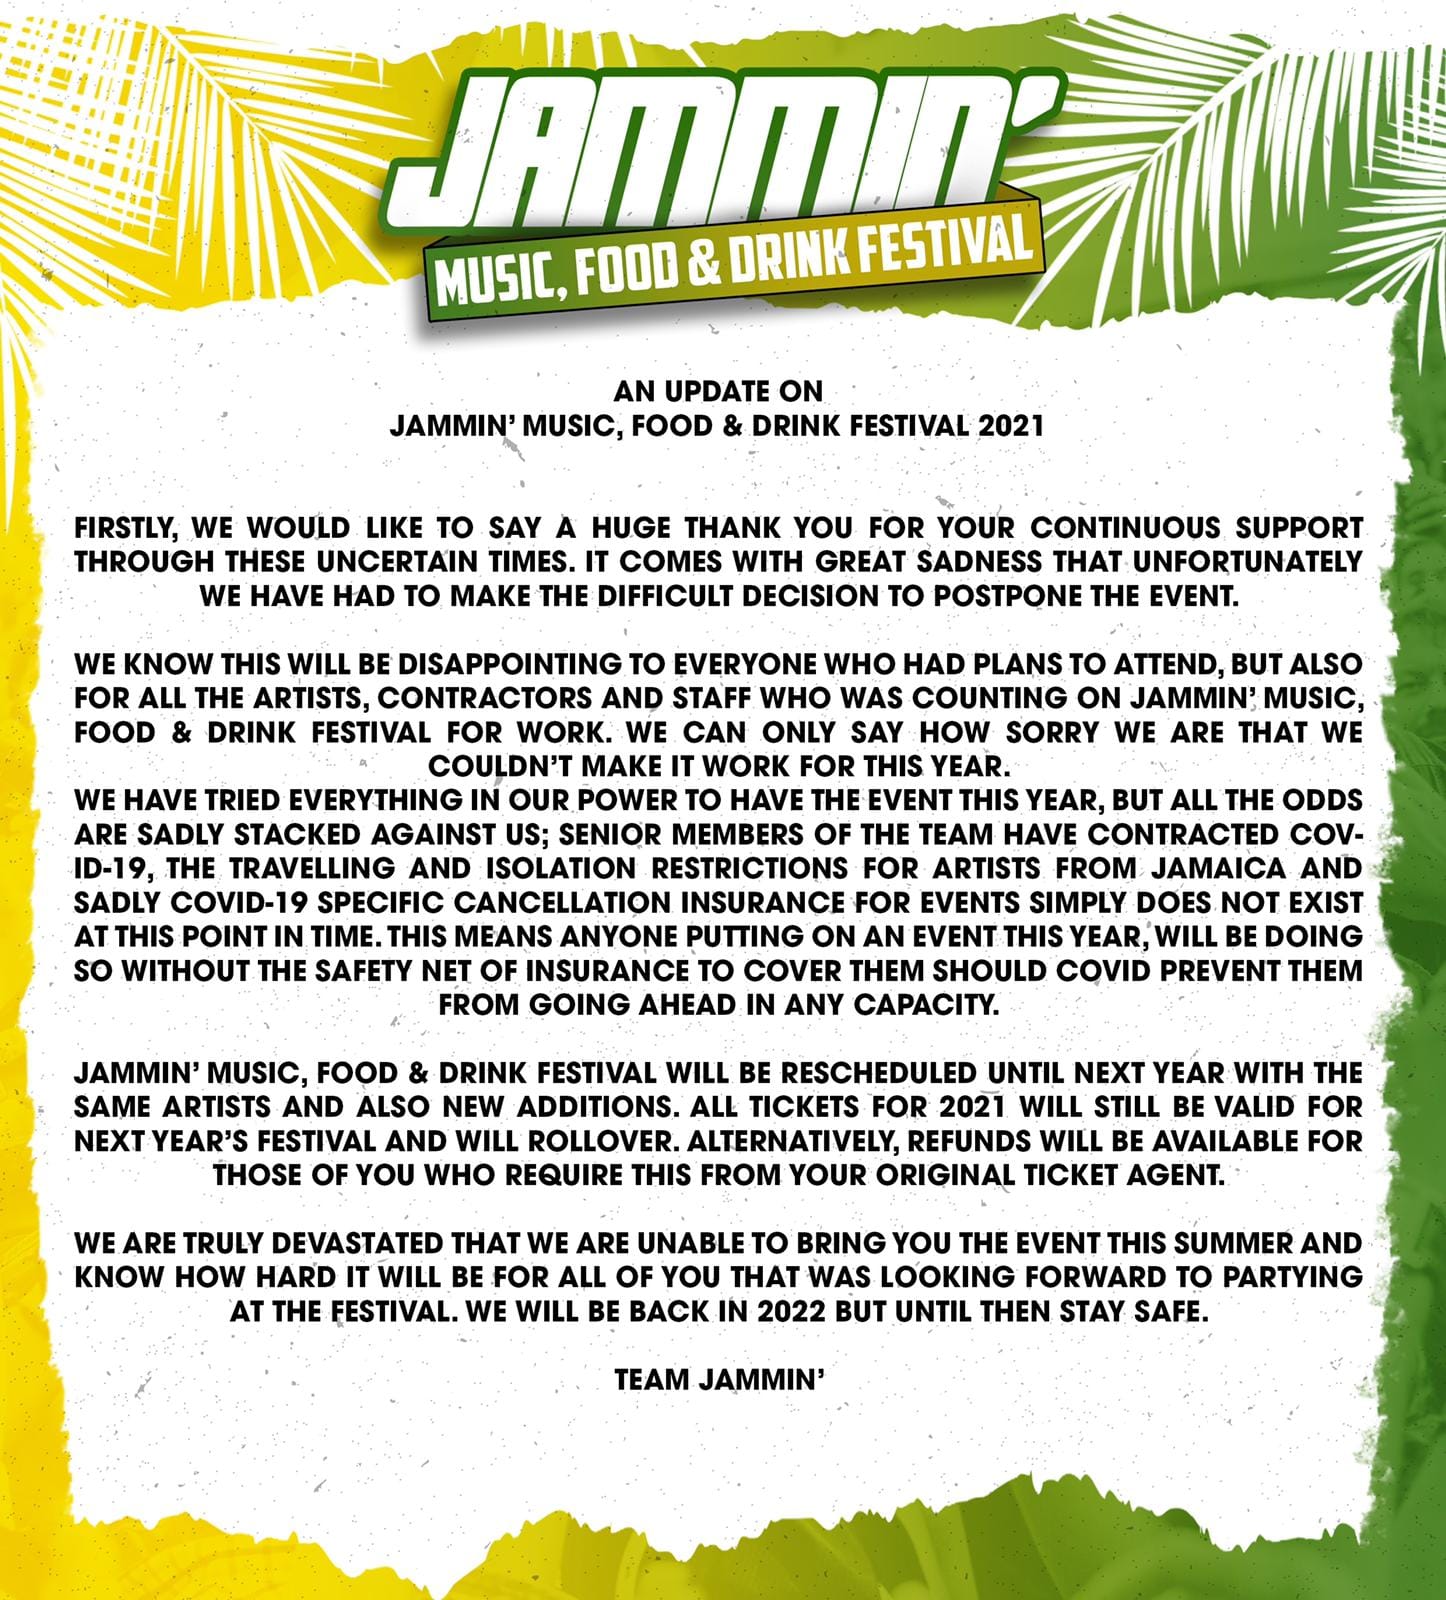 CANCELLED: Jammin Music, Food & Drink Festival 2021